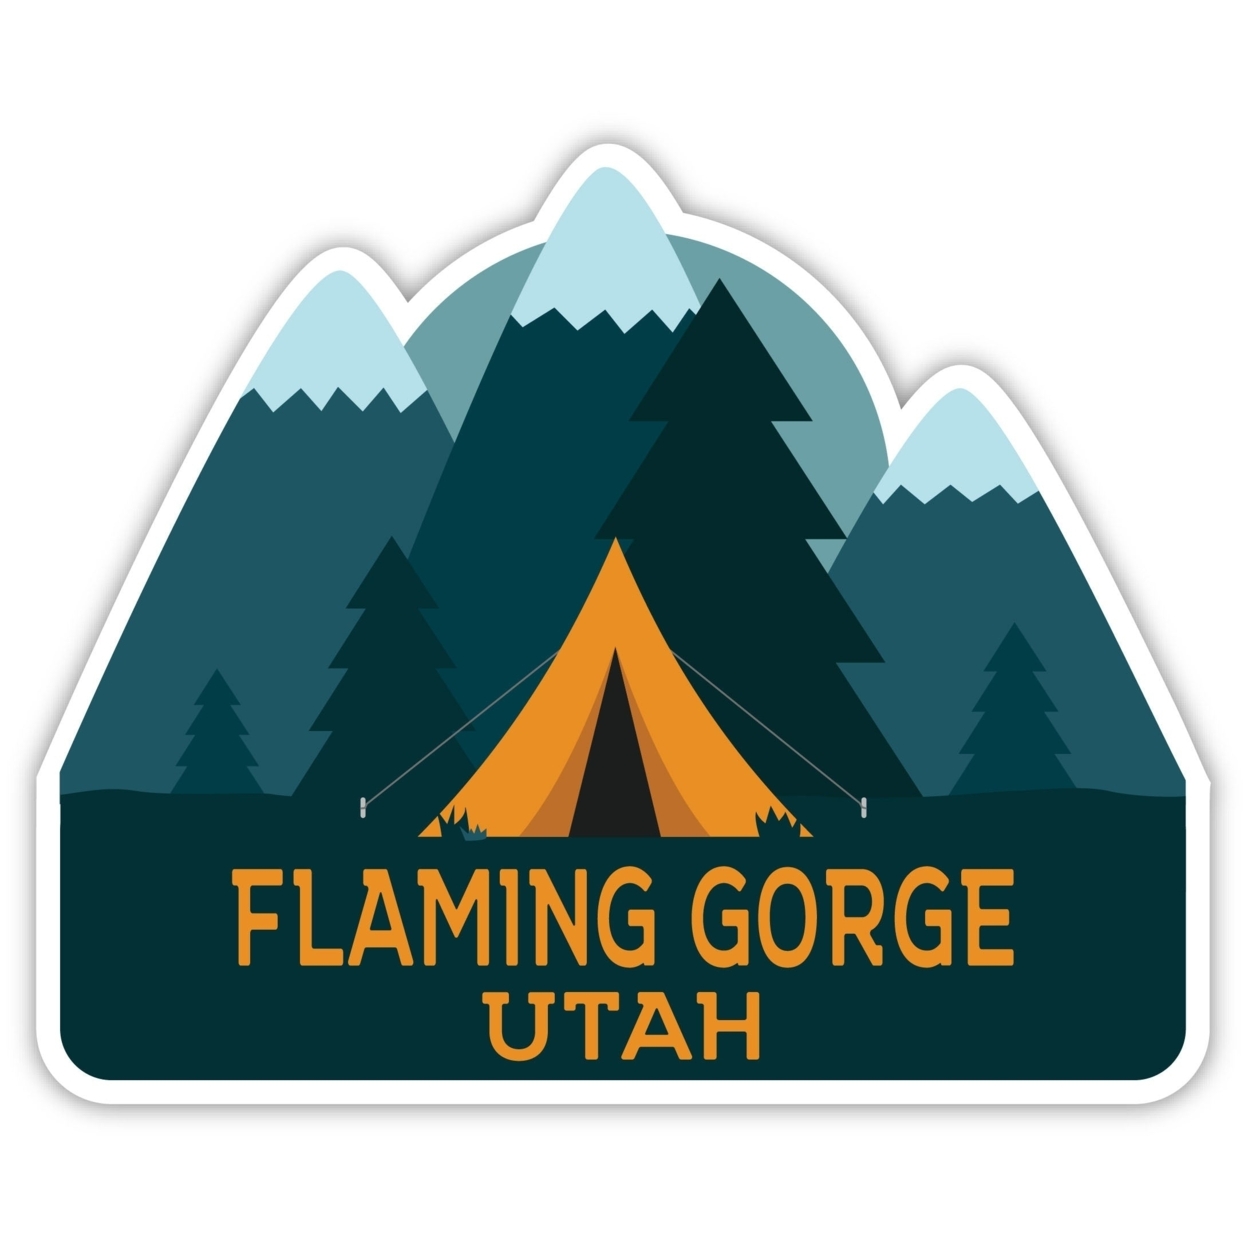 Flaming Gorge Utah Souvenir Decorative Stickers (Choose Theme And Size) - 4-Pack, 4-Inch, Tent